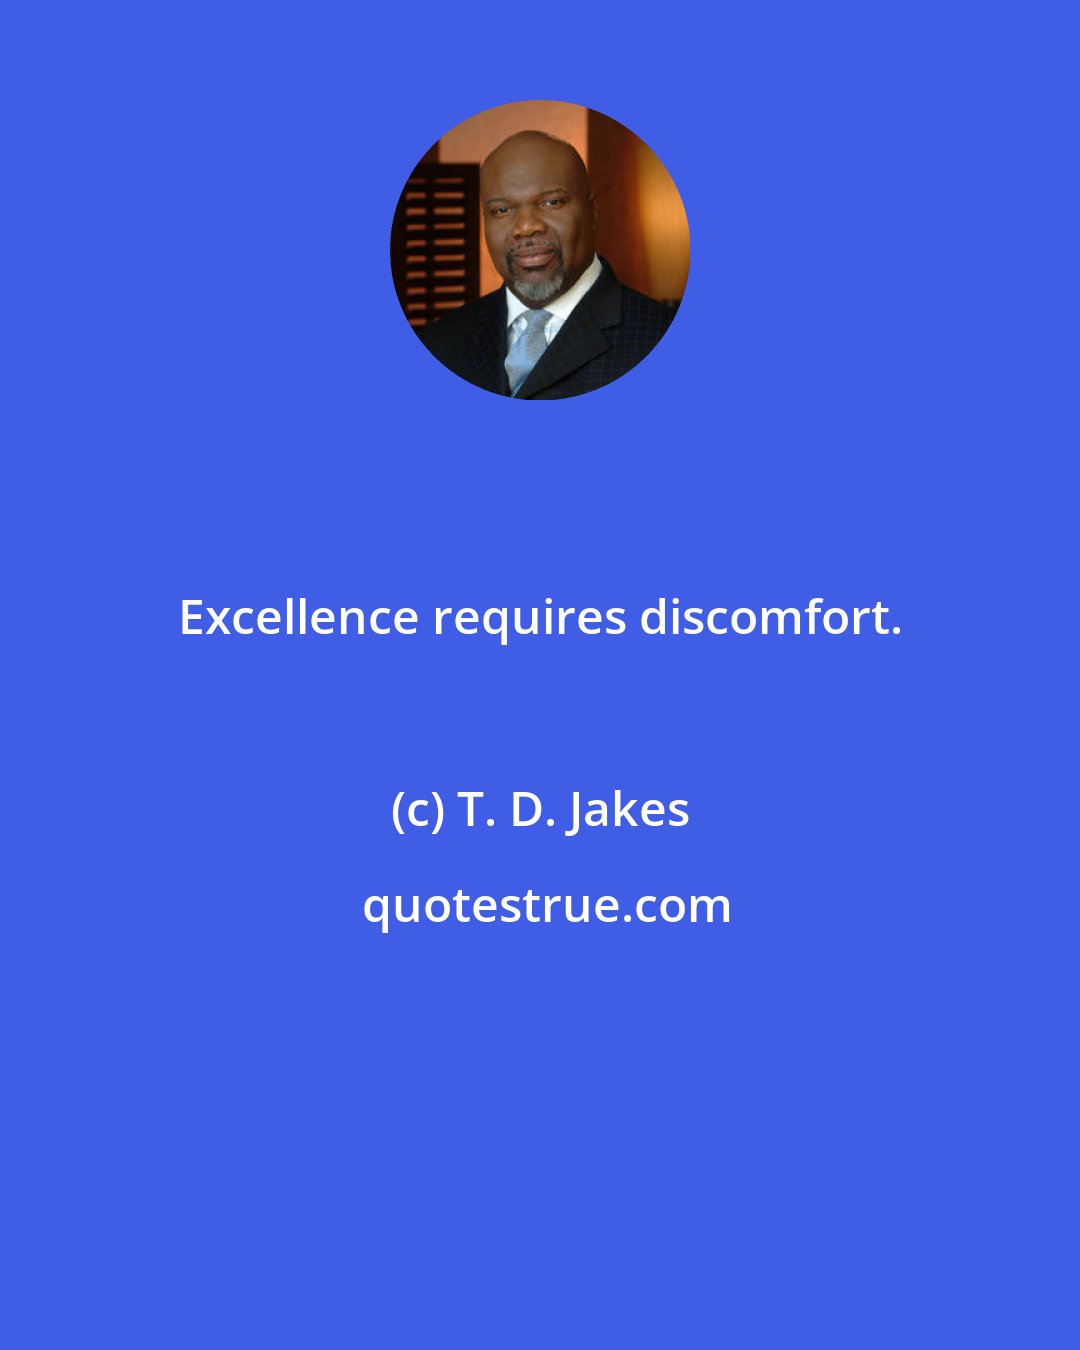 T. D. Jakes: Excellence requires discomfort.